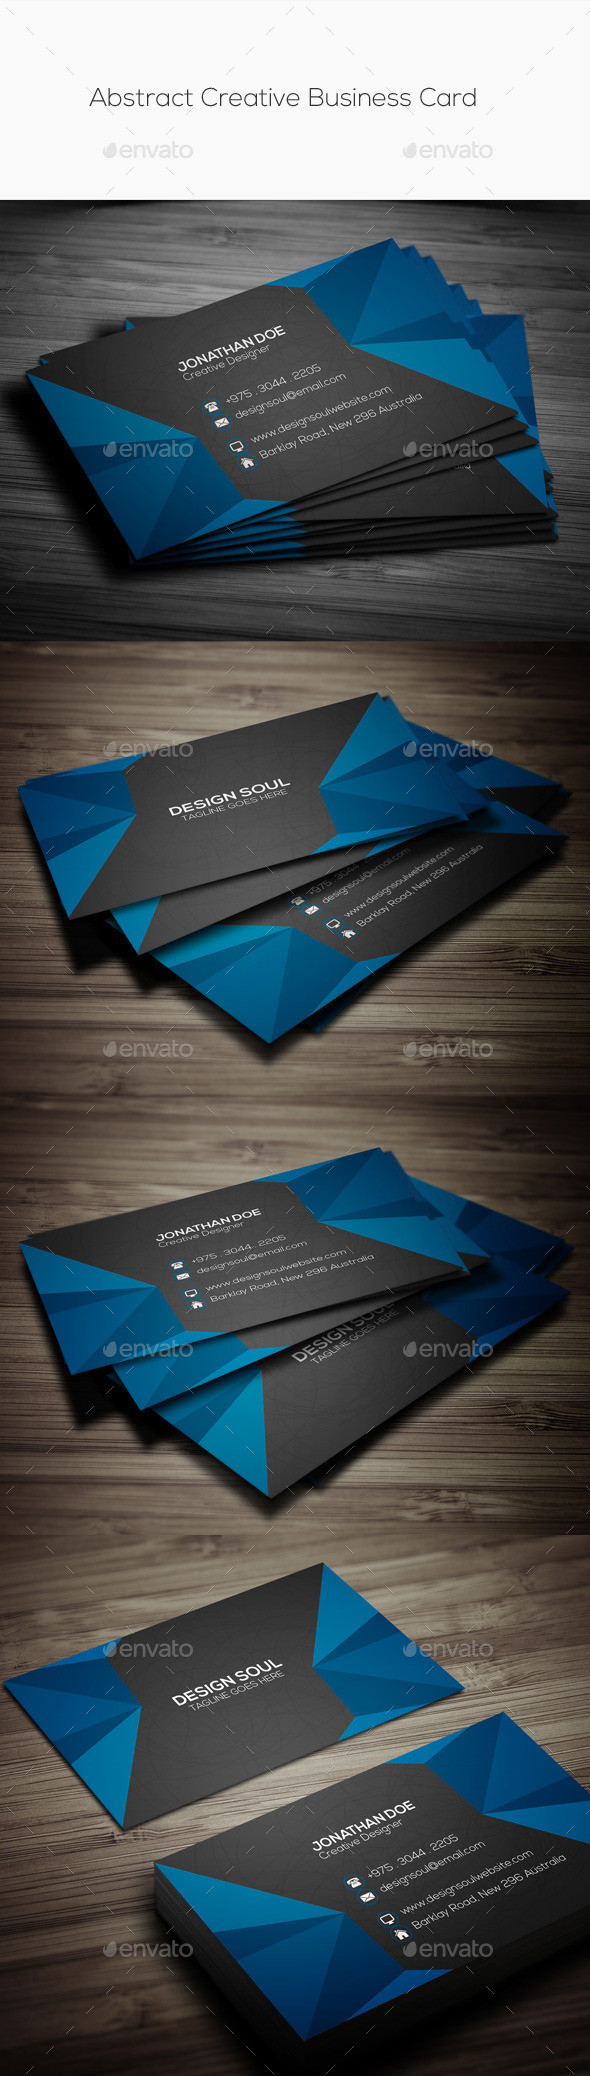 Abstract creative business card preview